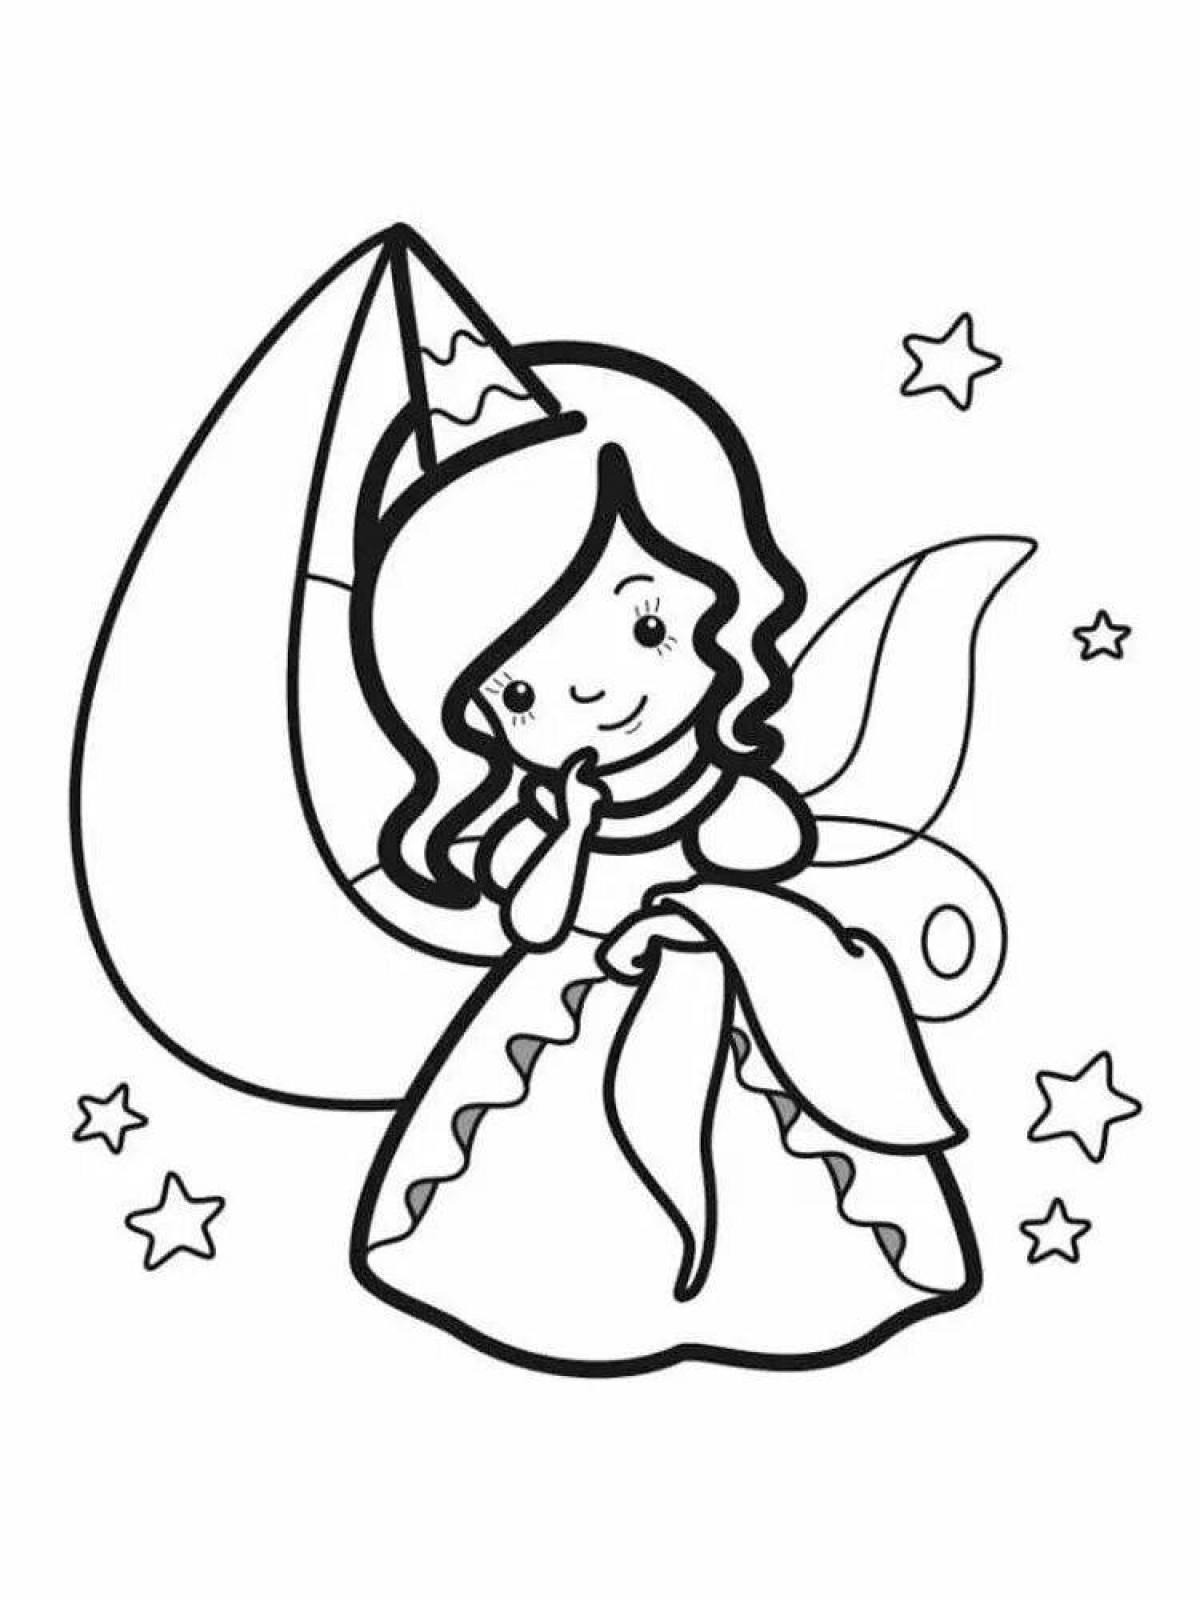 Great sorceress coloring page